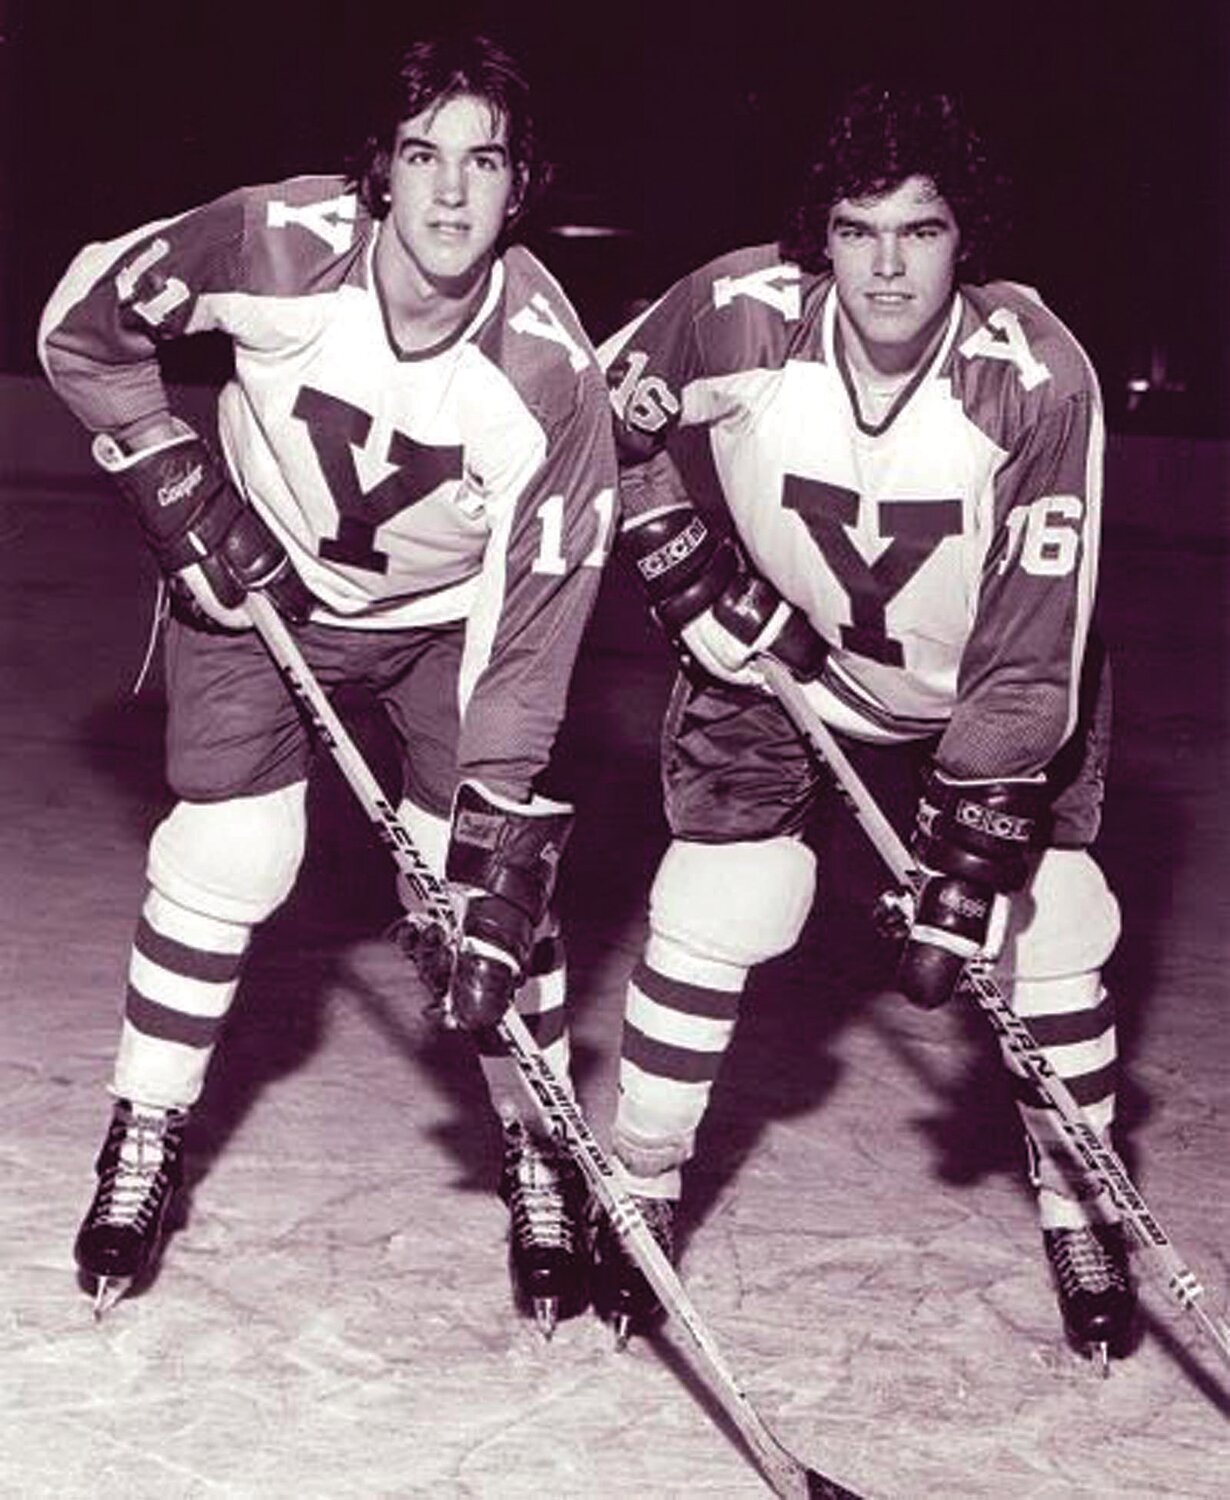 ON THE ICE: Stephen and Dave Harrington during their hockey days at Yale.